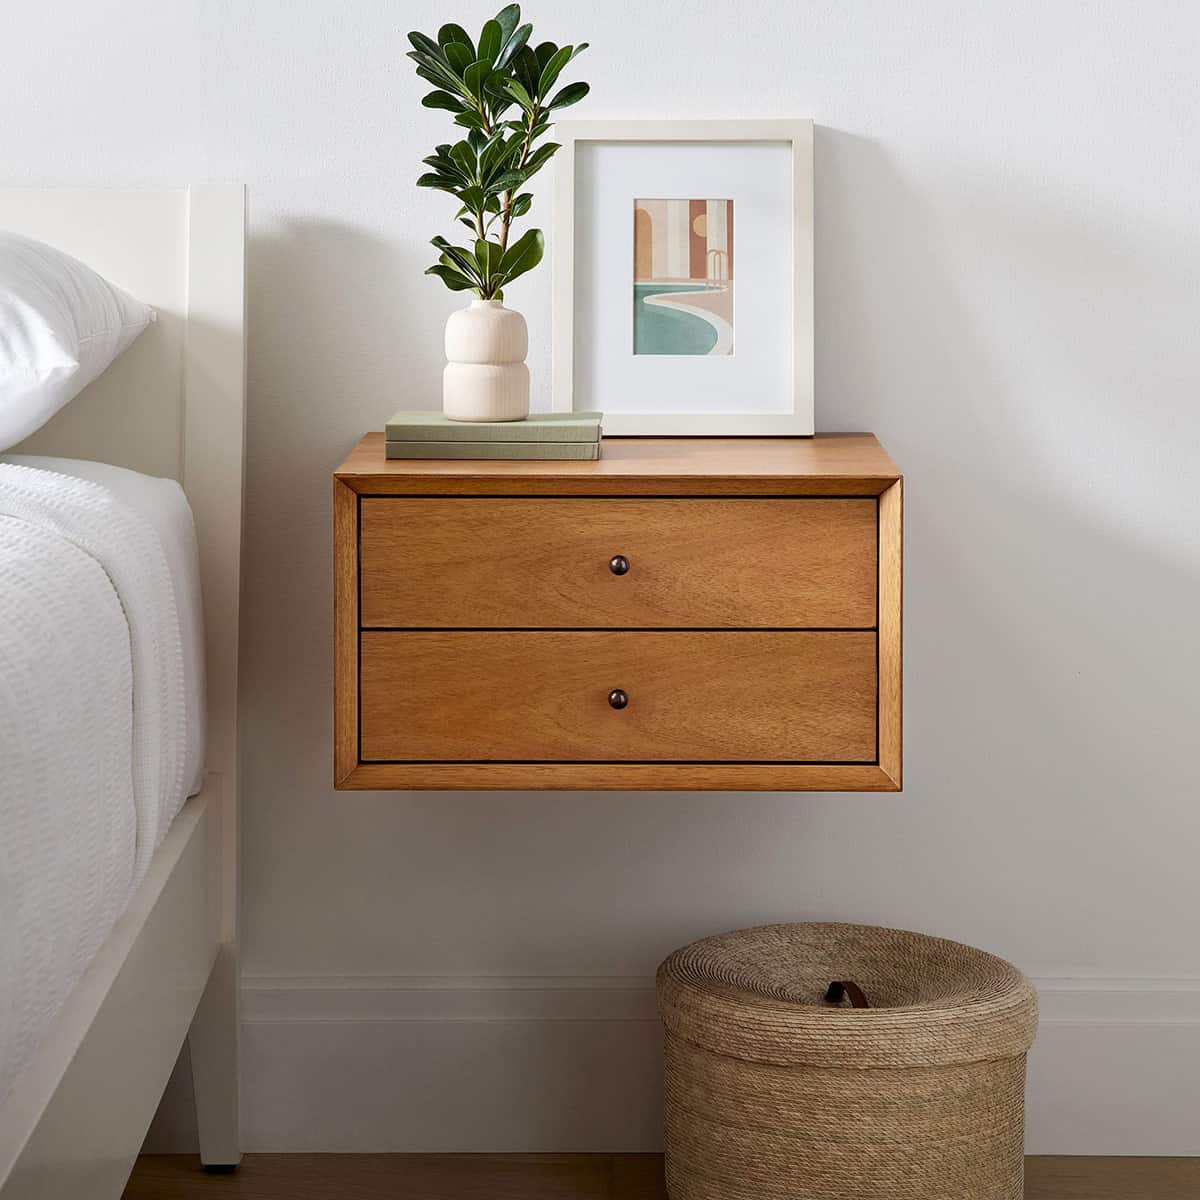 Mid-century style wall-mounted 2-drawer nightstand with modern art piece and plant.